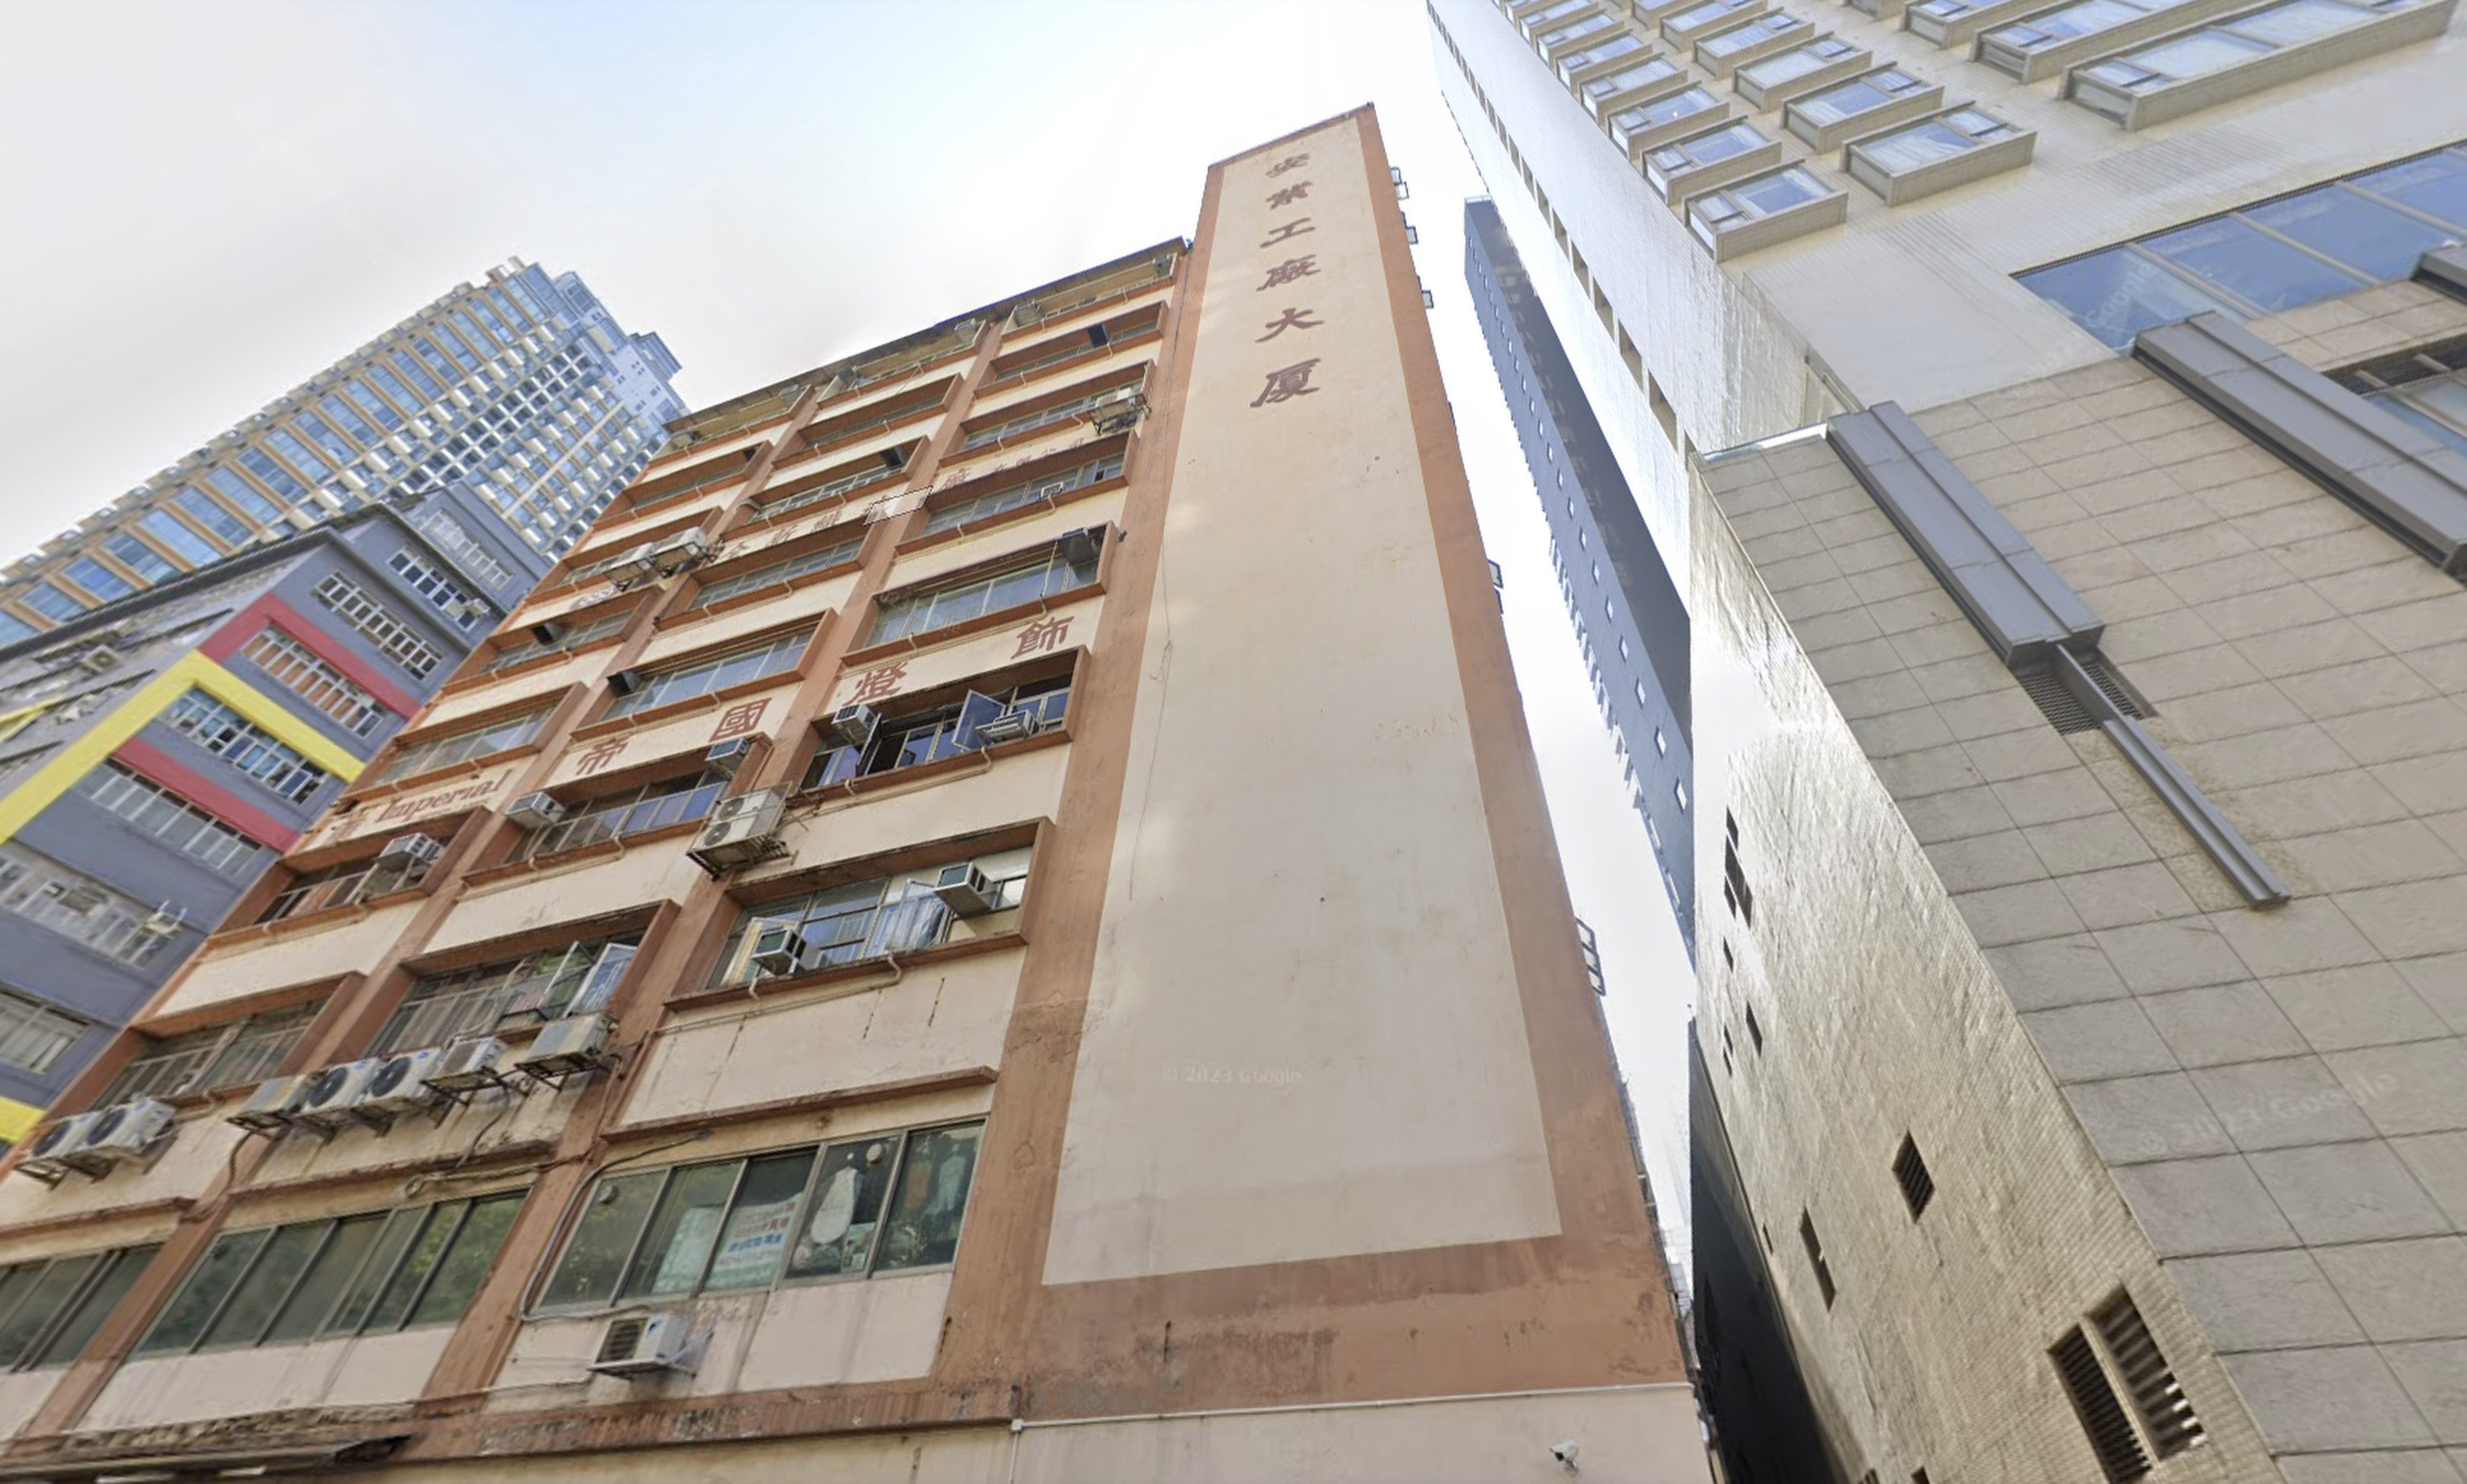 On Yip Factory Building on Ivy Street in Tai Kok Tsui, Hong Kong. It is hard to avoid the conclusion that a smaller offering of land for sale reflects the gloomy mood in the property market. Photo: Google